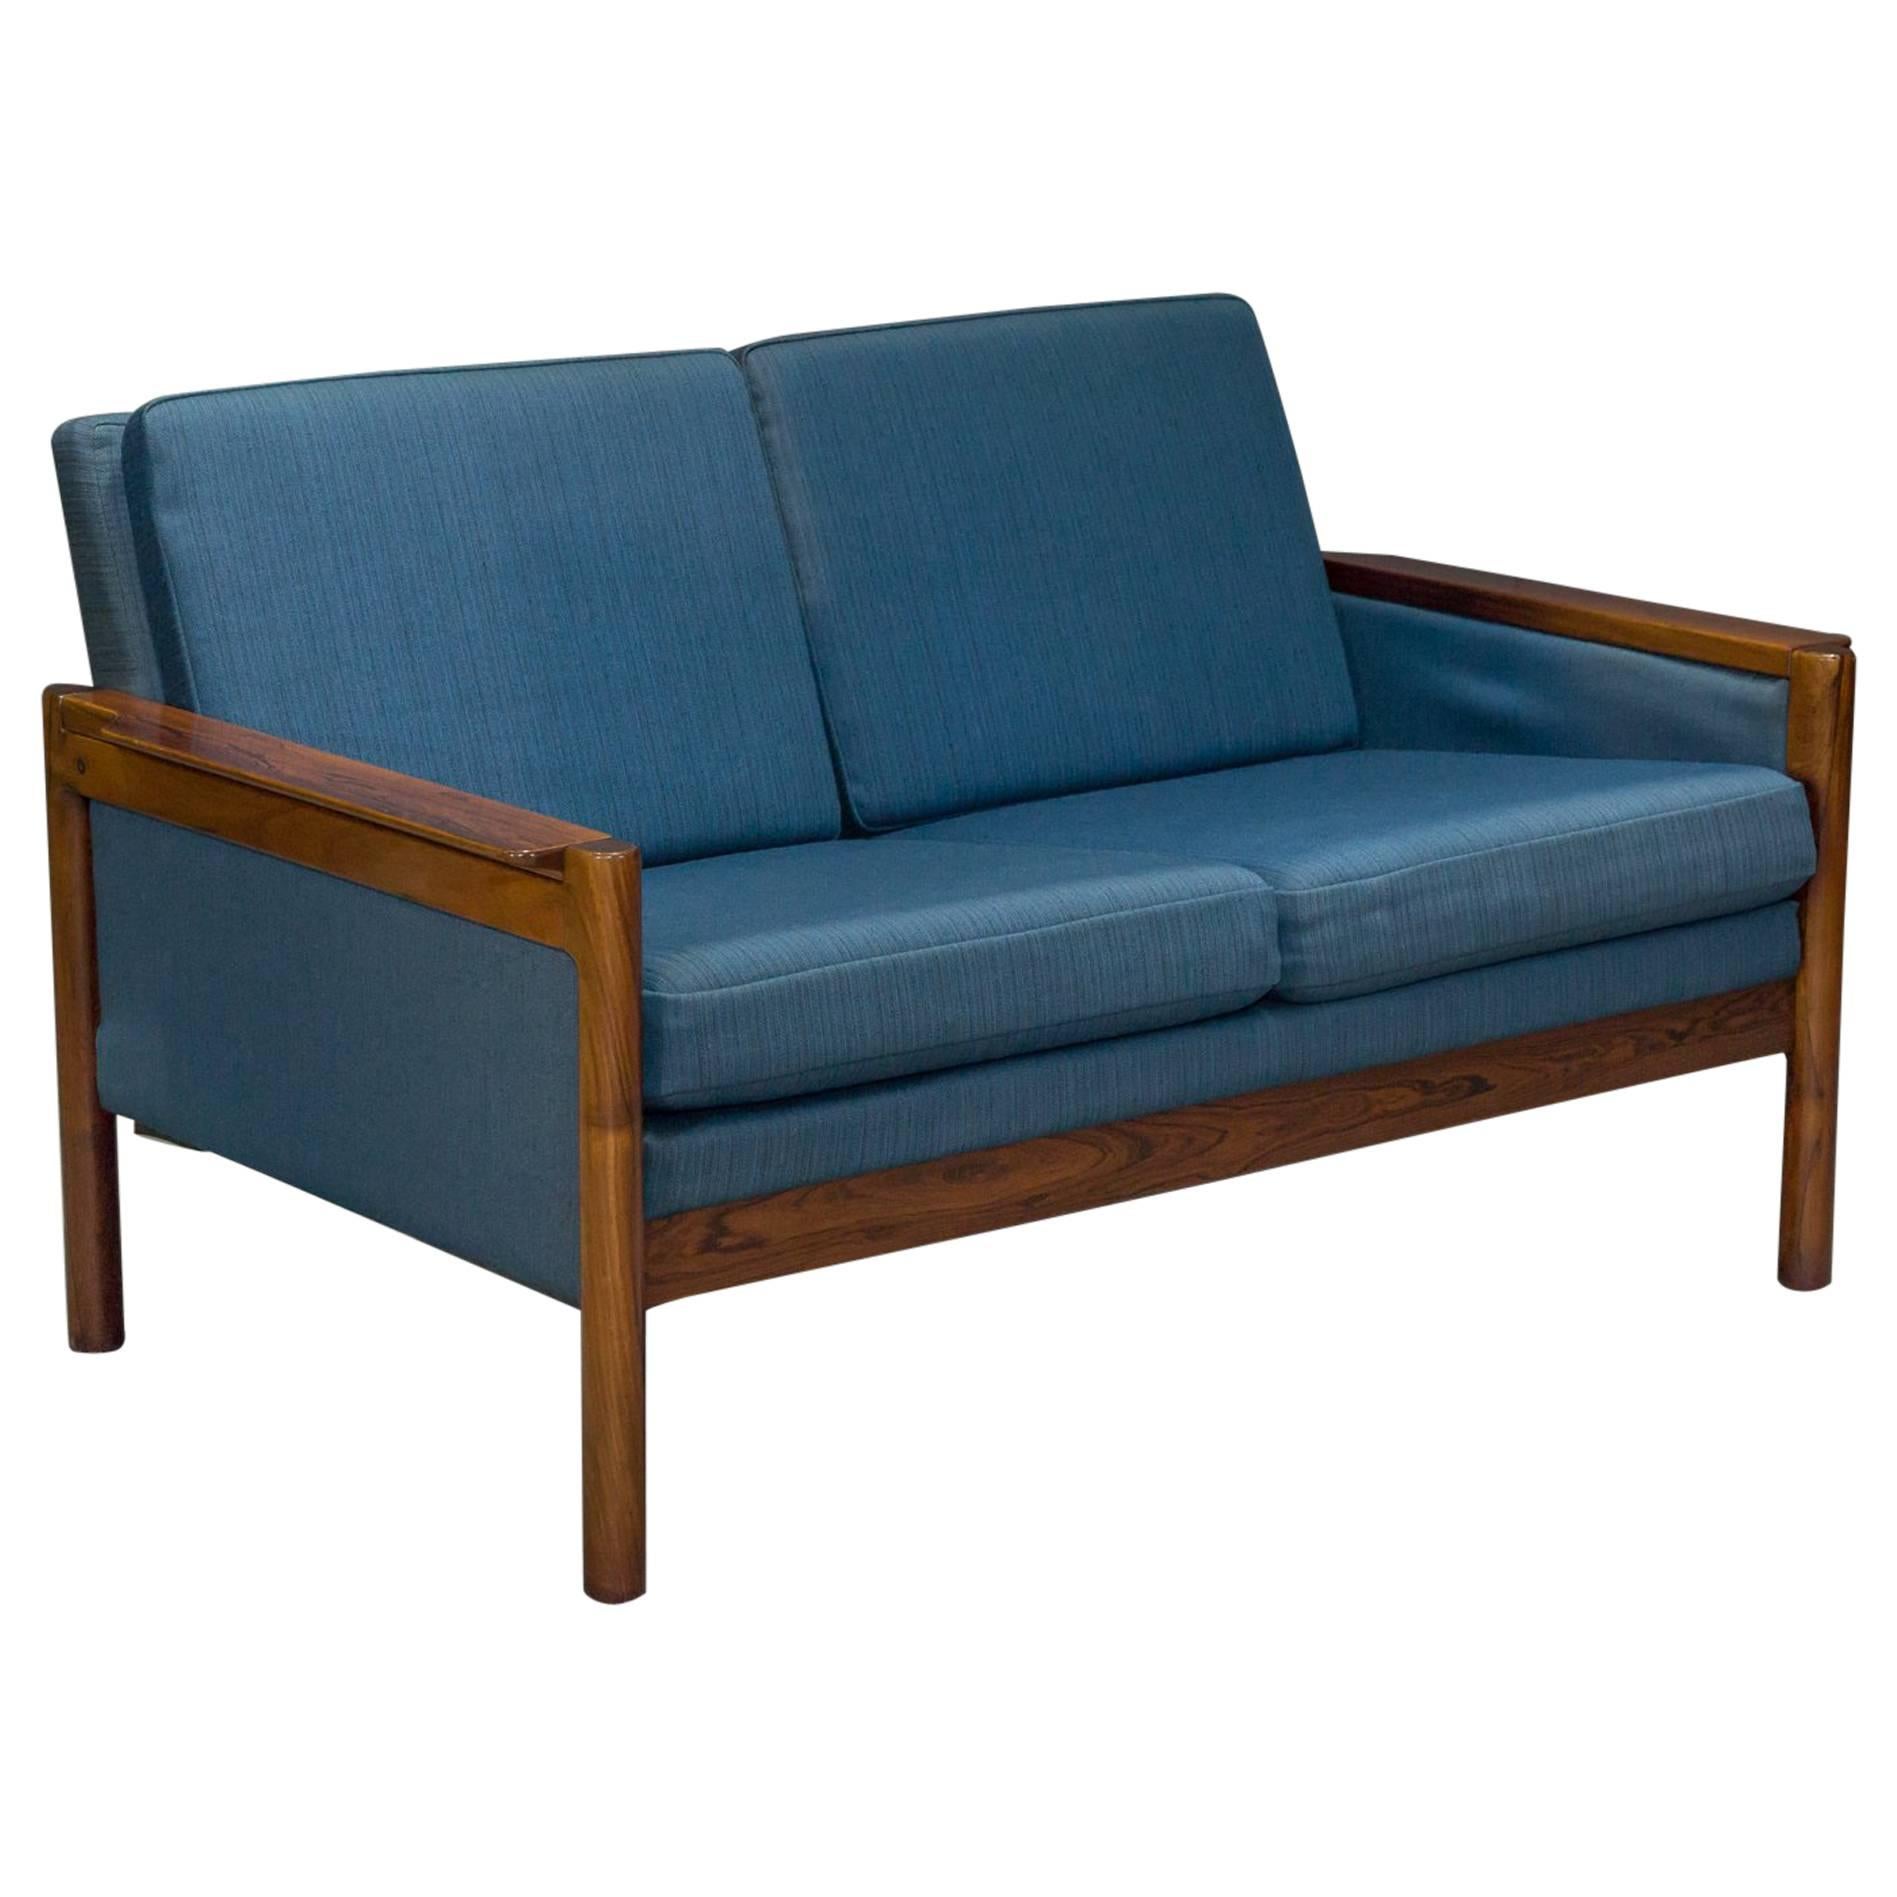 Danish Modern Rosewood Settee with Blue Textile